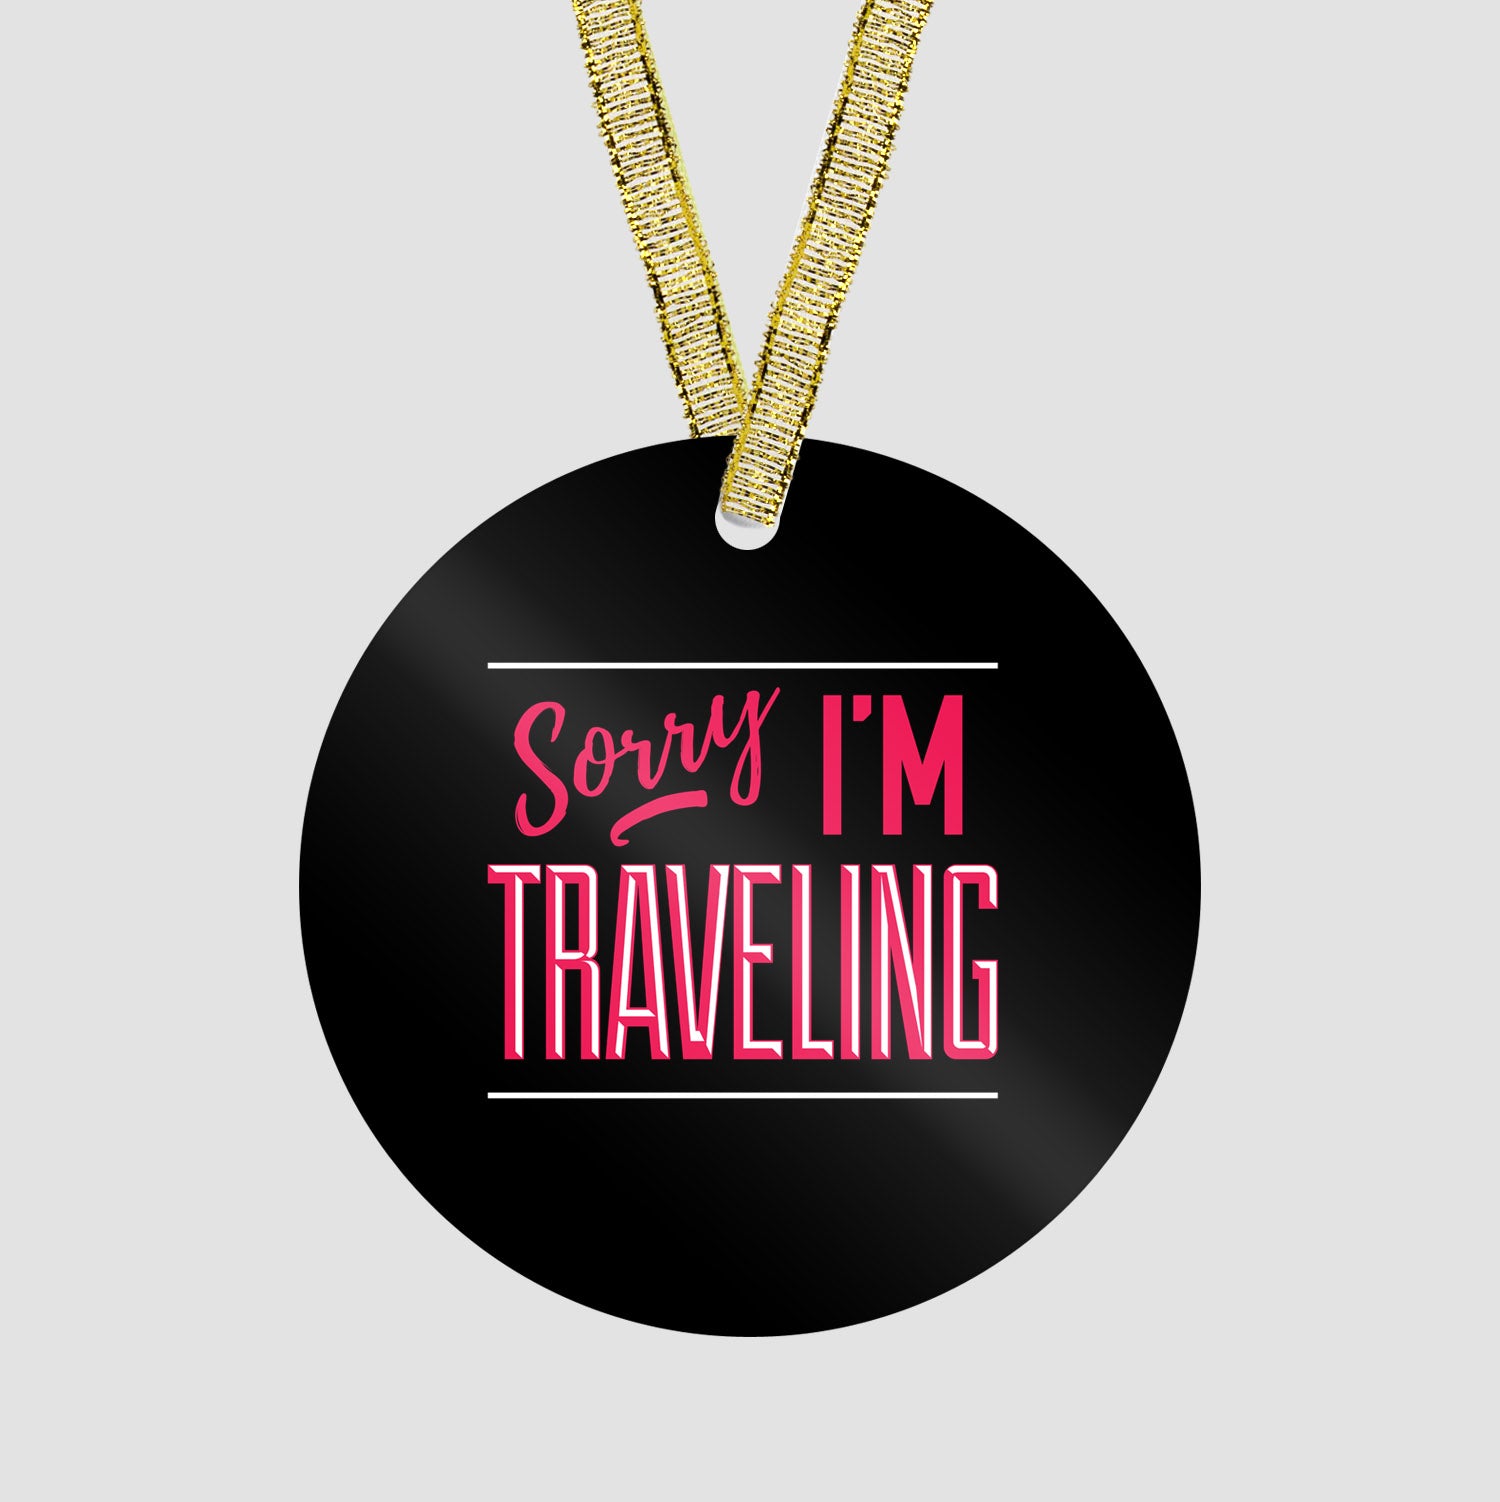 Sorry, I'm traveling - Ornament - Airportag